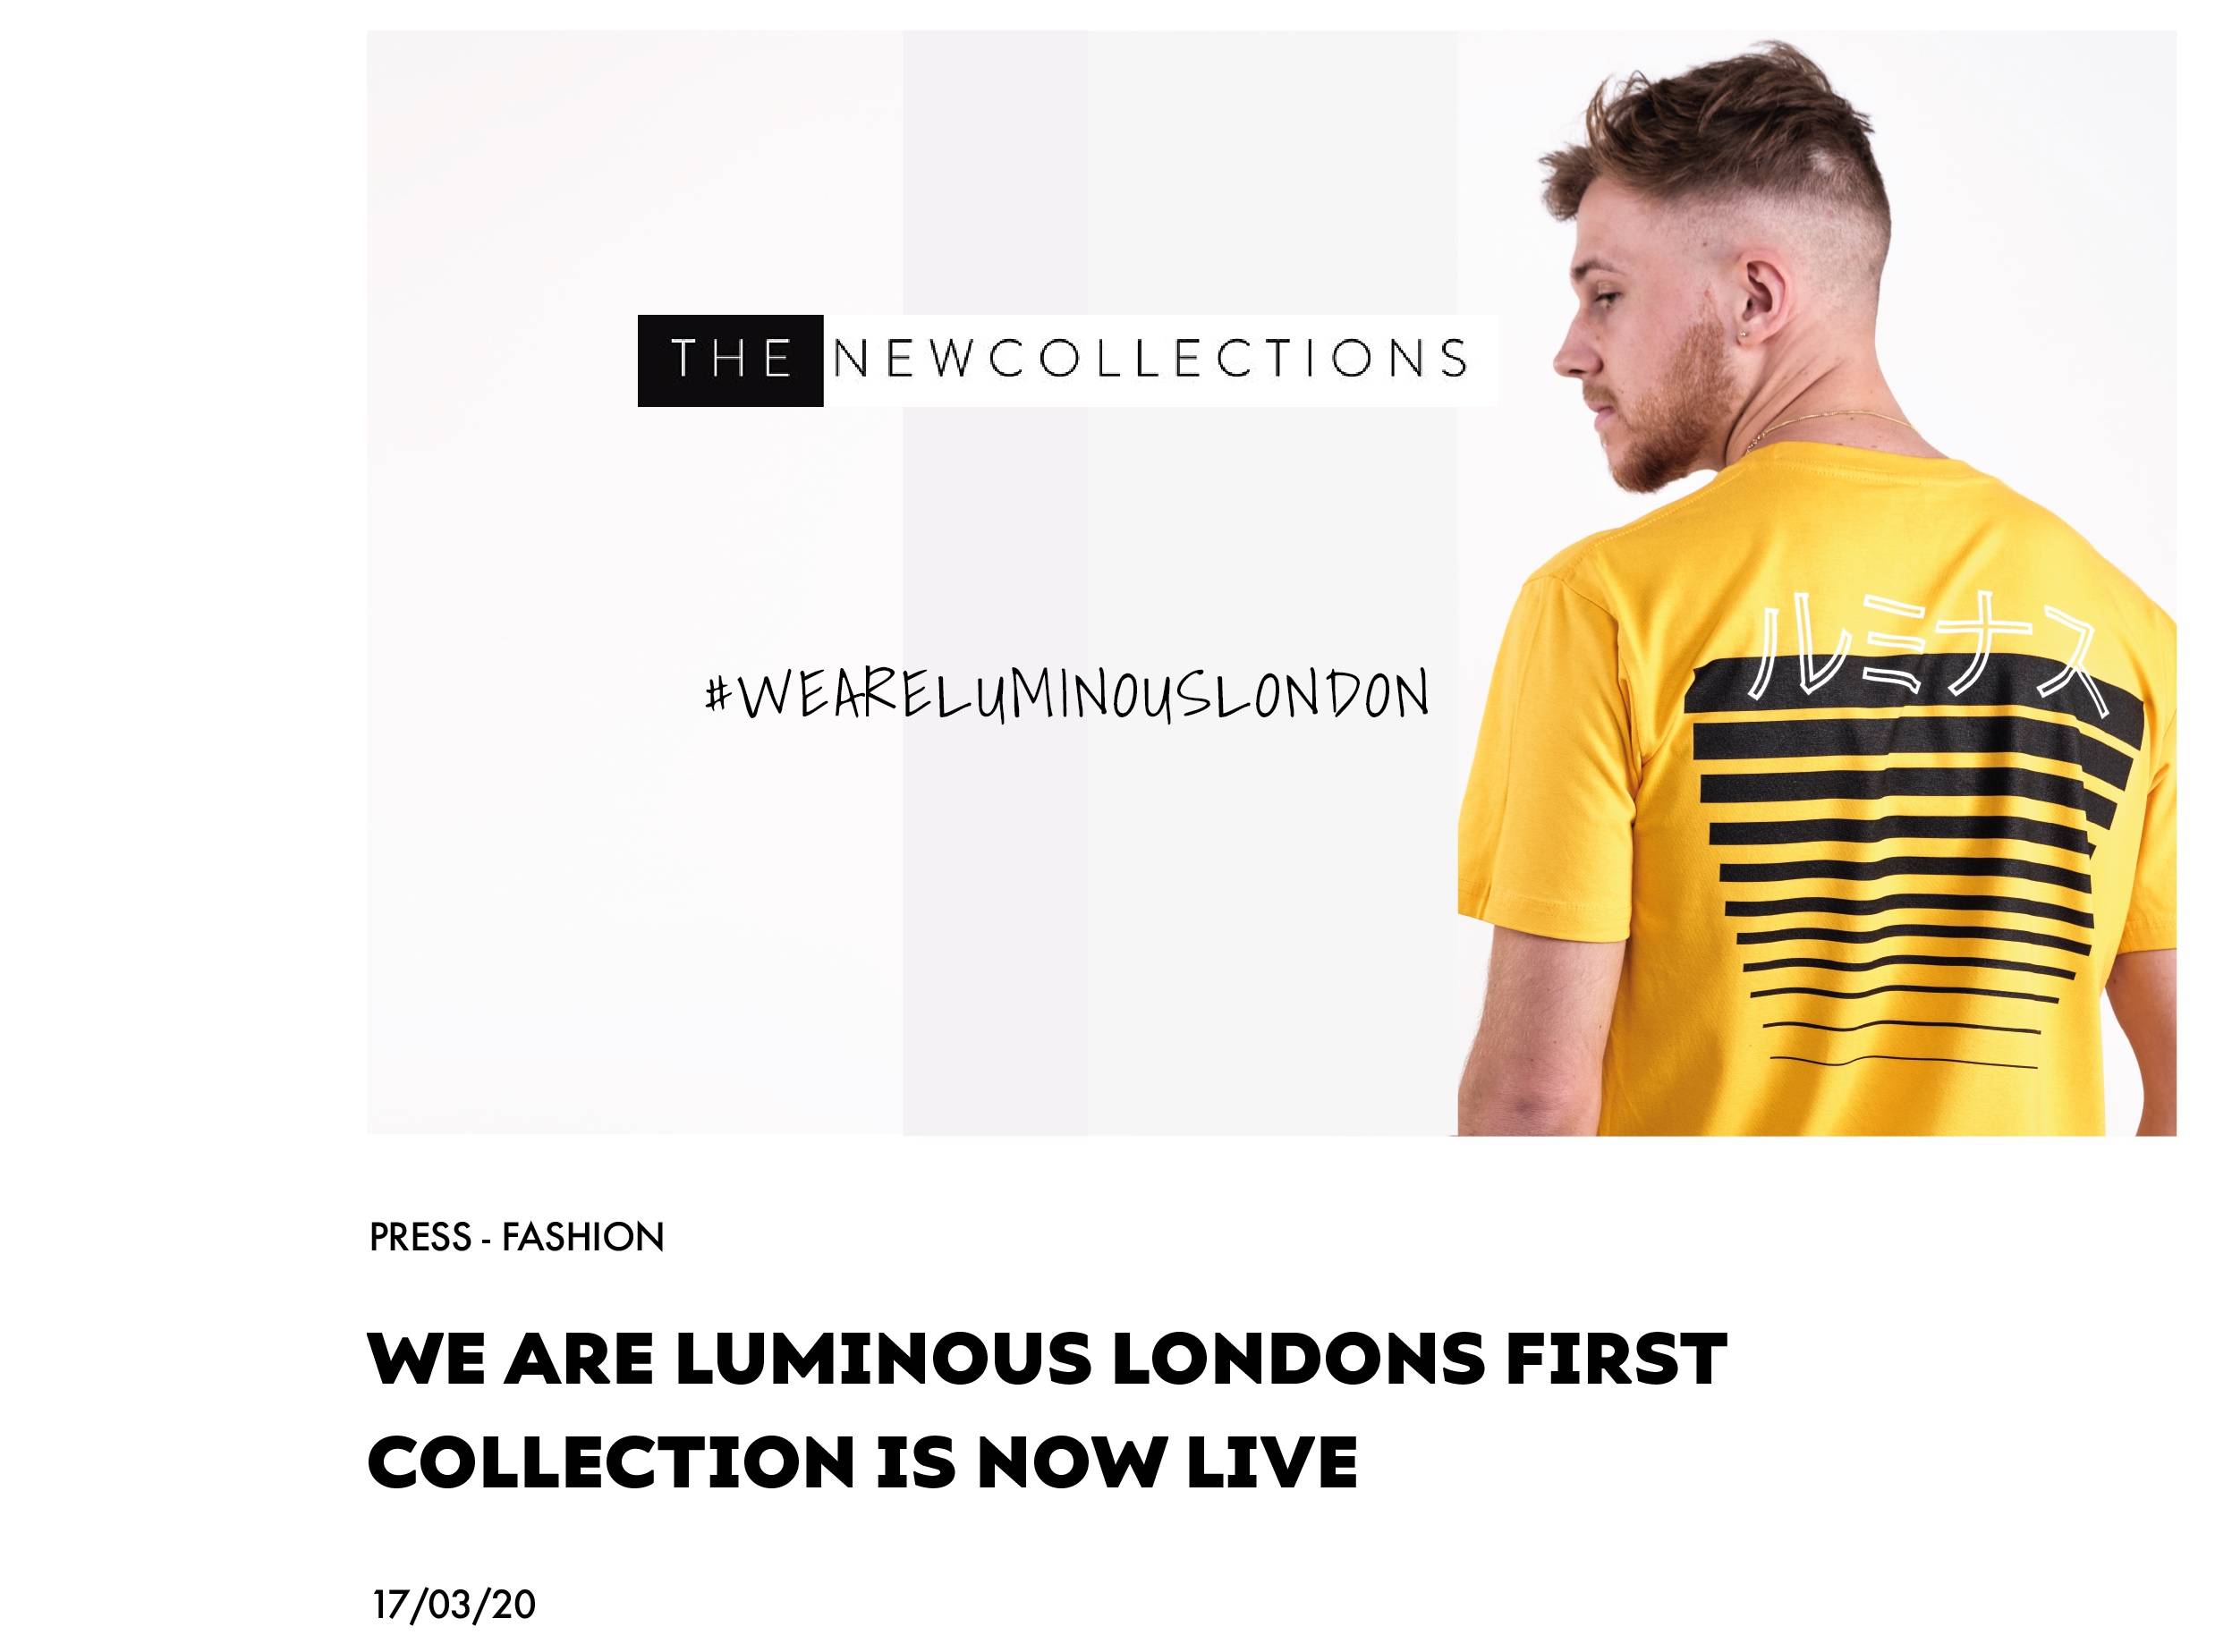 We Are Luminous Londons First Collection Is Now Live